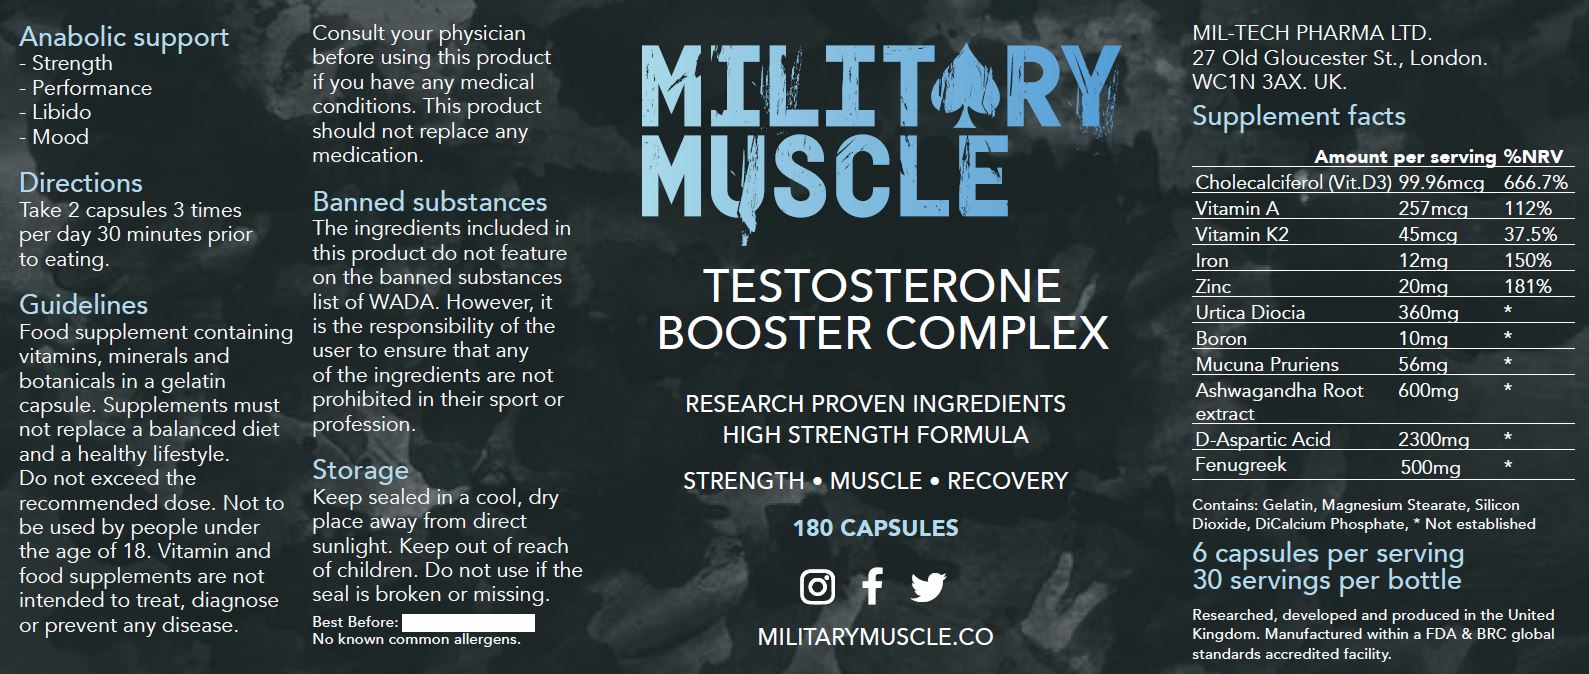 Military Muscle supplement facts label